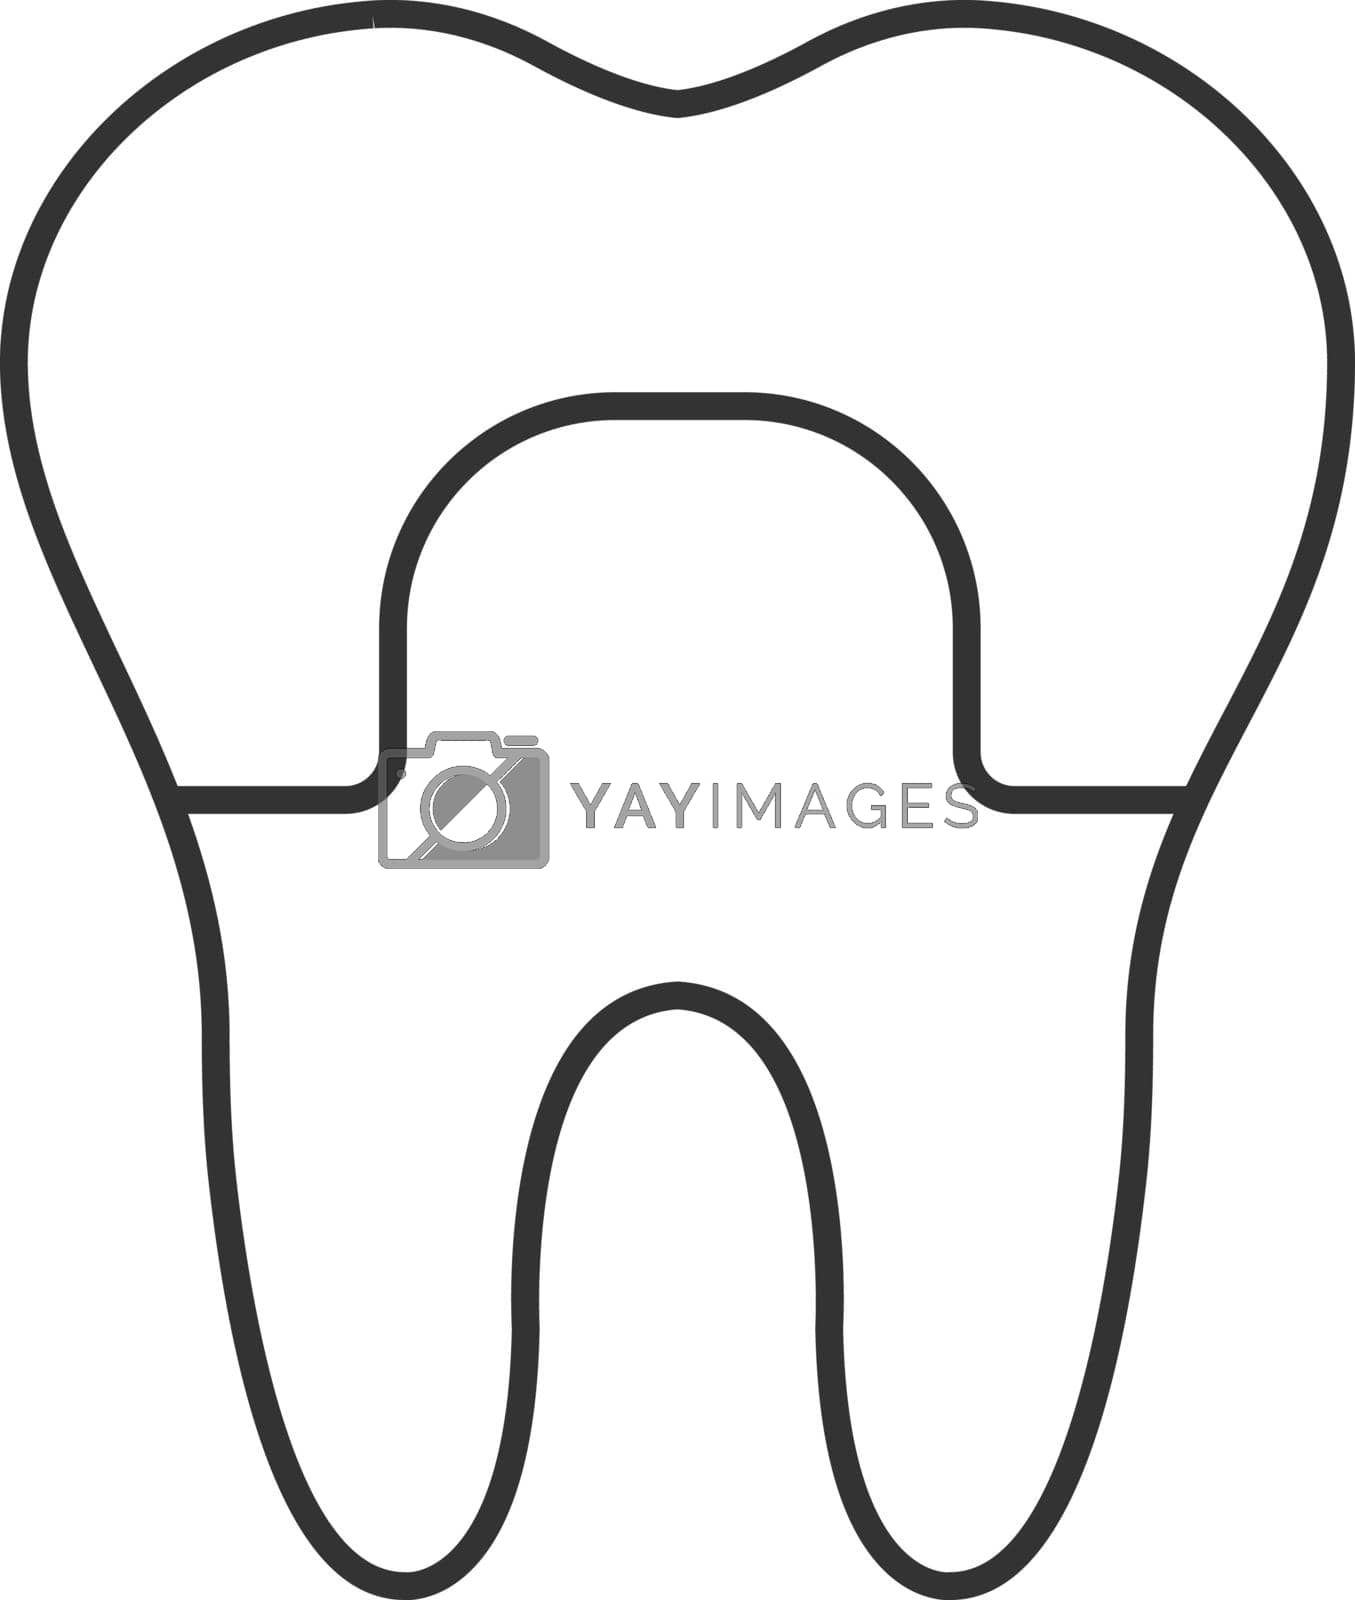 Dental crown linear icon. Thin line illustration. Tooth restoration. Contour symbol. Vector isolated outline drawing